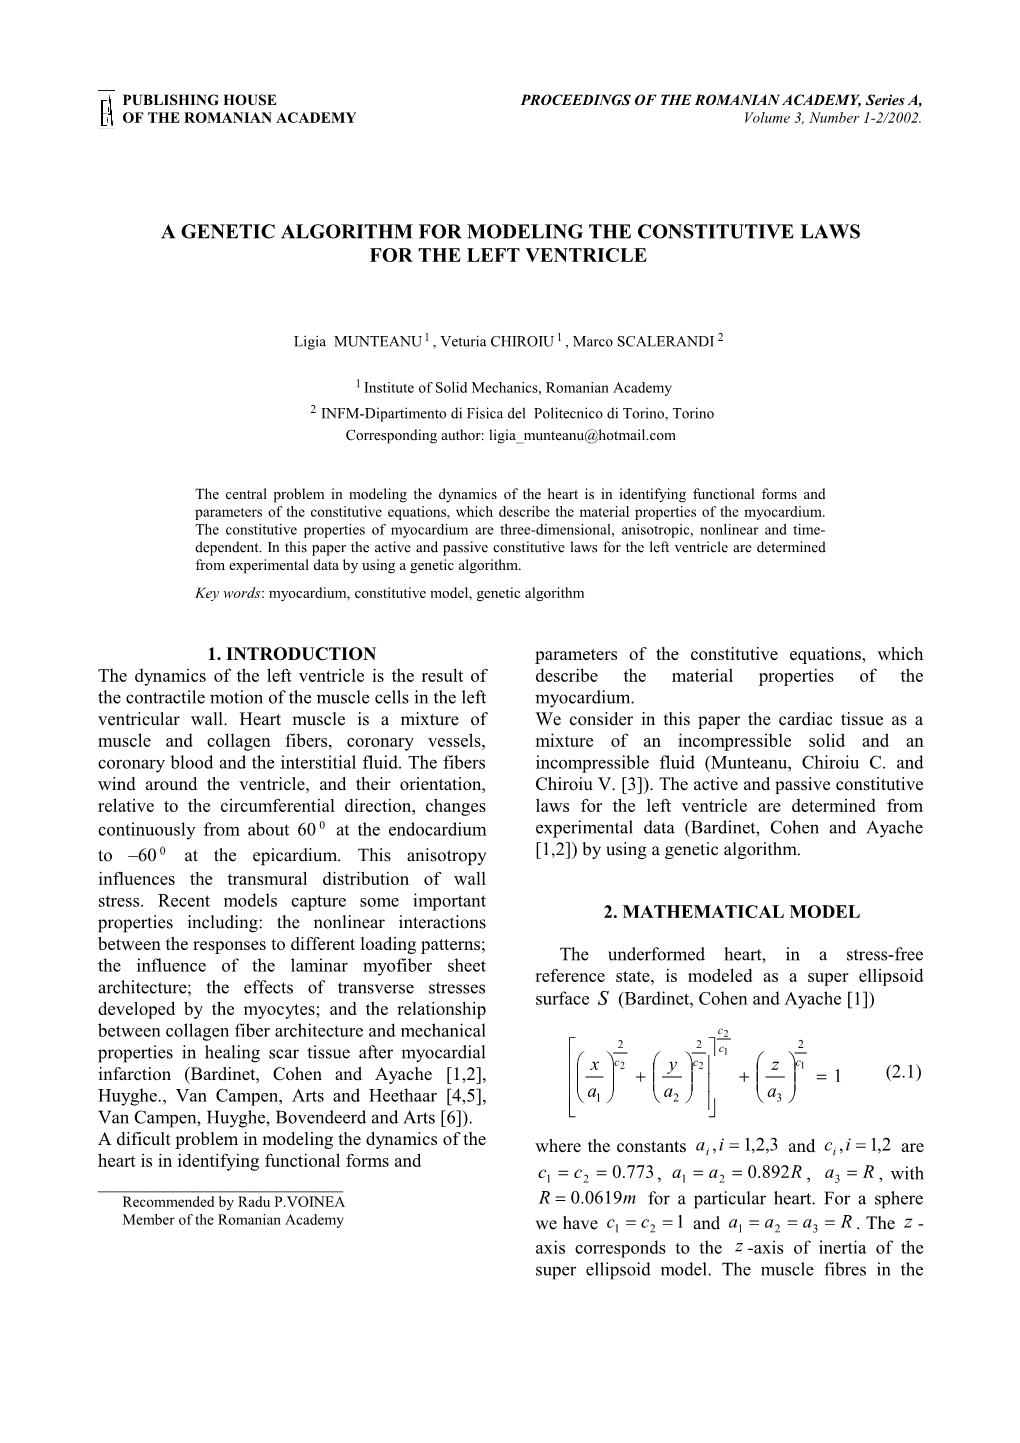 A Genetic Algorithm for Modeling the Constitutive Laws